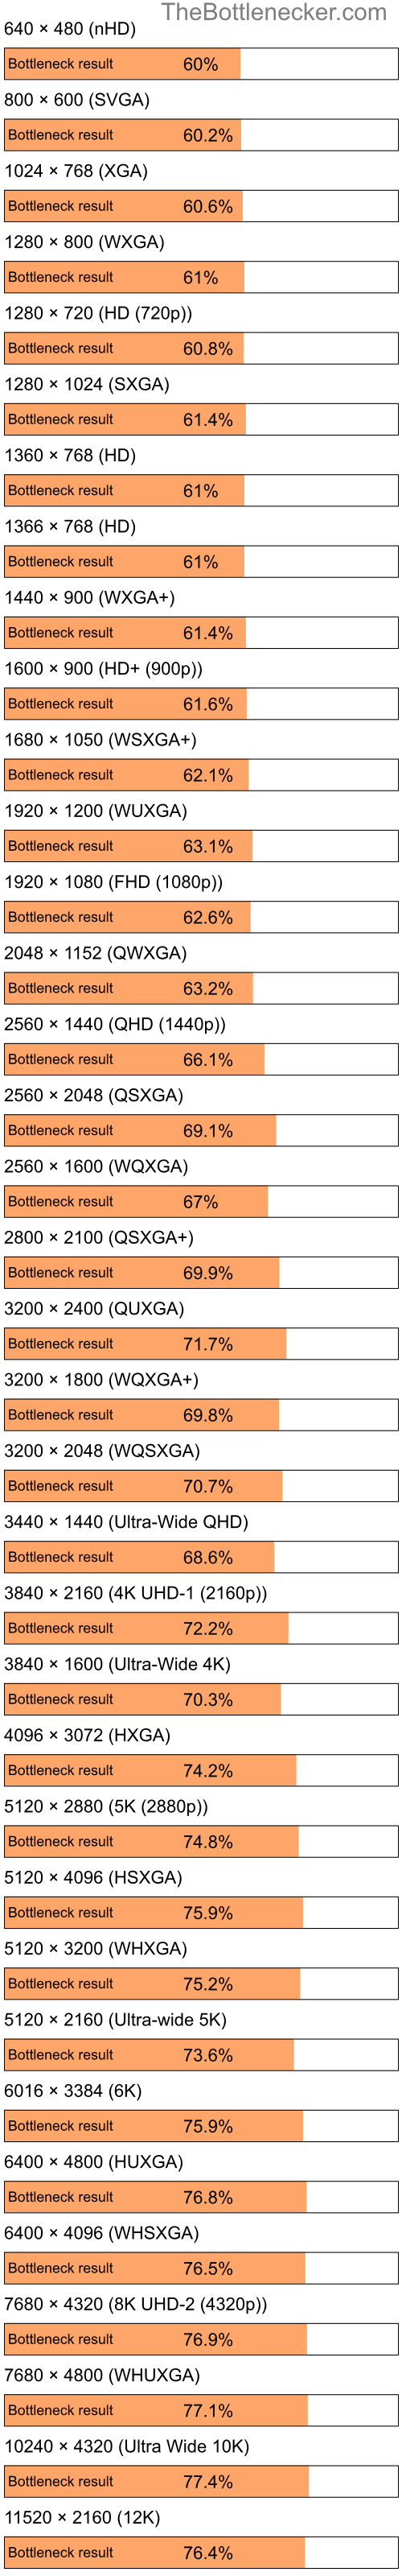 Bottleneck results by resolution for Intel Atom N280 and AMD Radeon HD 2350 in Processor Intense Tasks